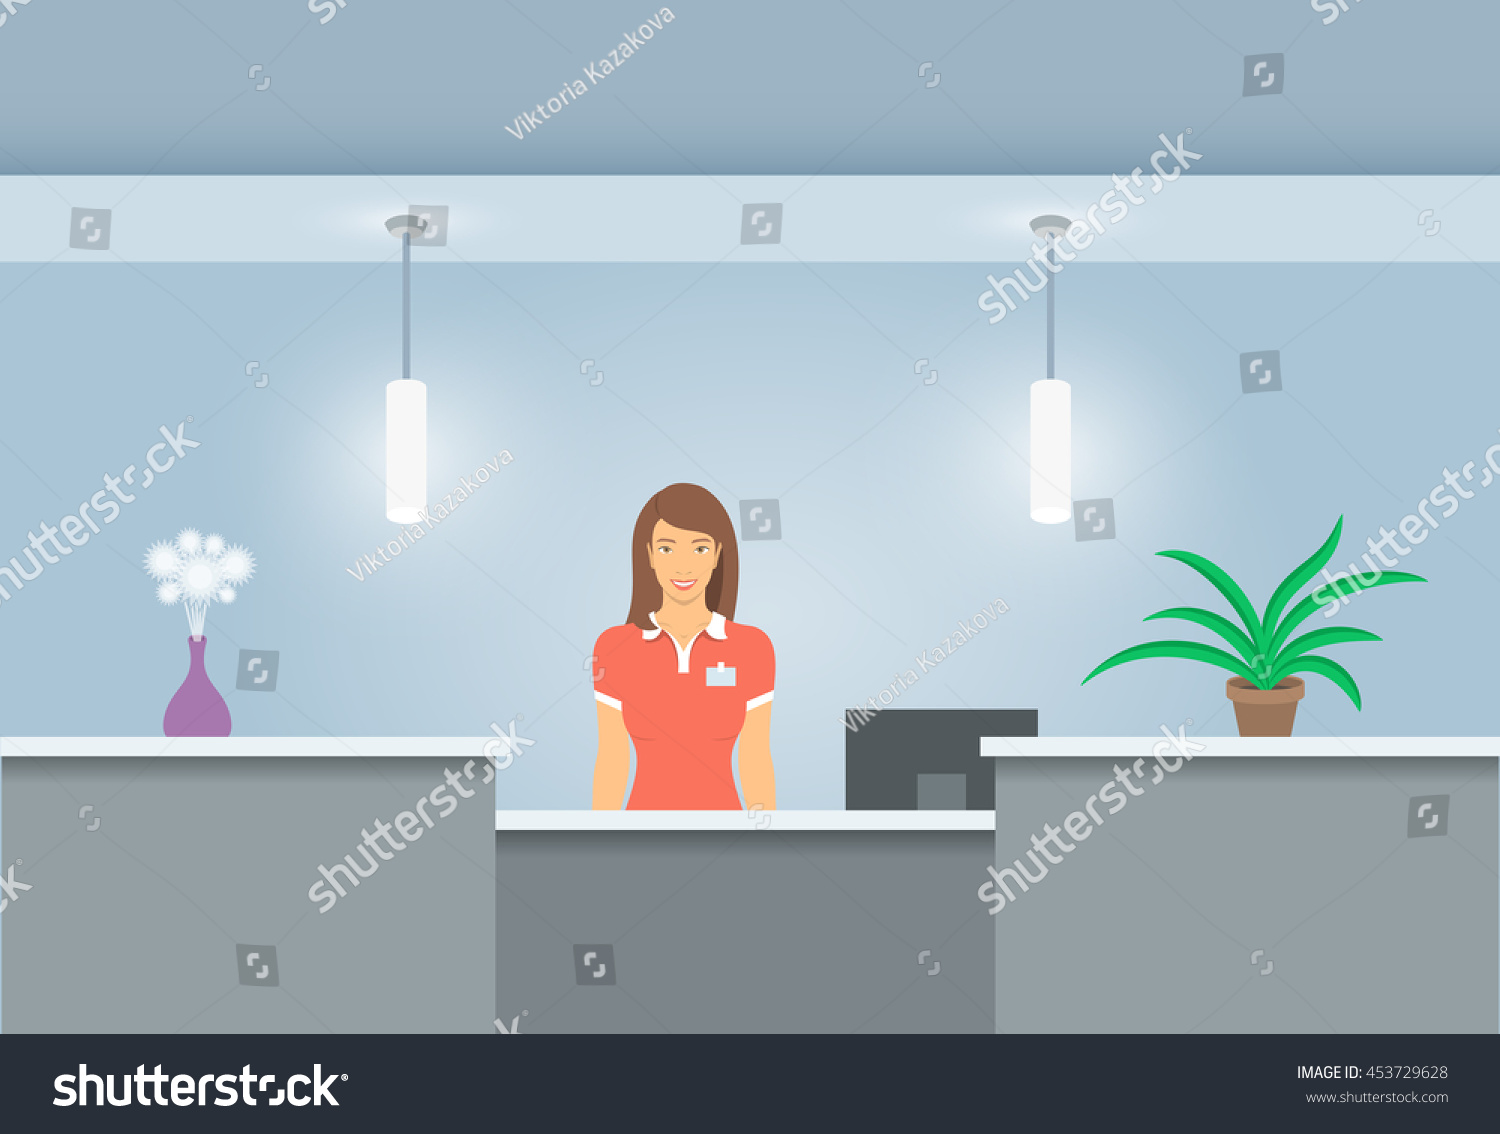 Young Woman Receptionist Stands Reception Desk Stock Vector Royalty Free 453729628 Shutterstock 8183